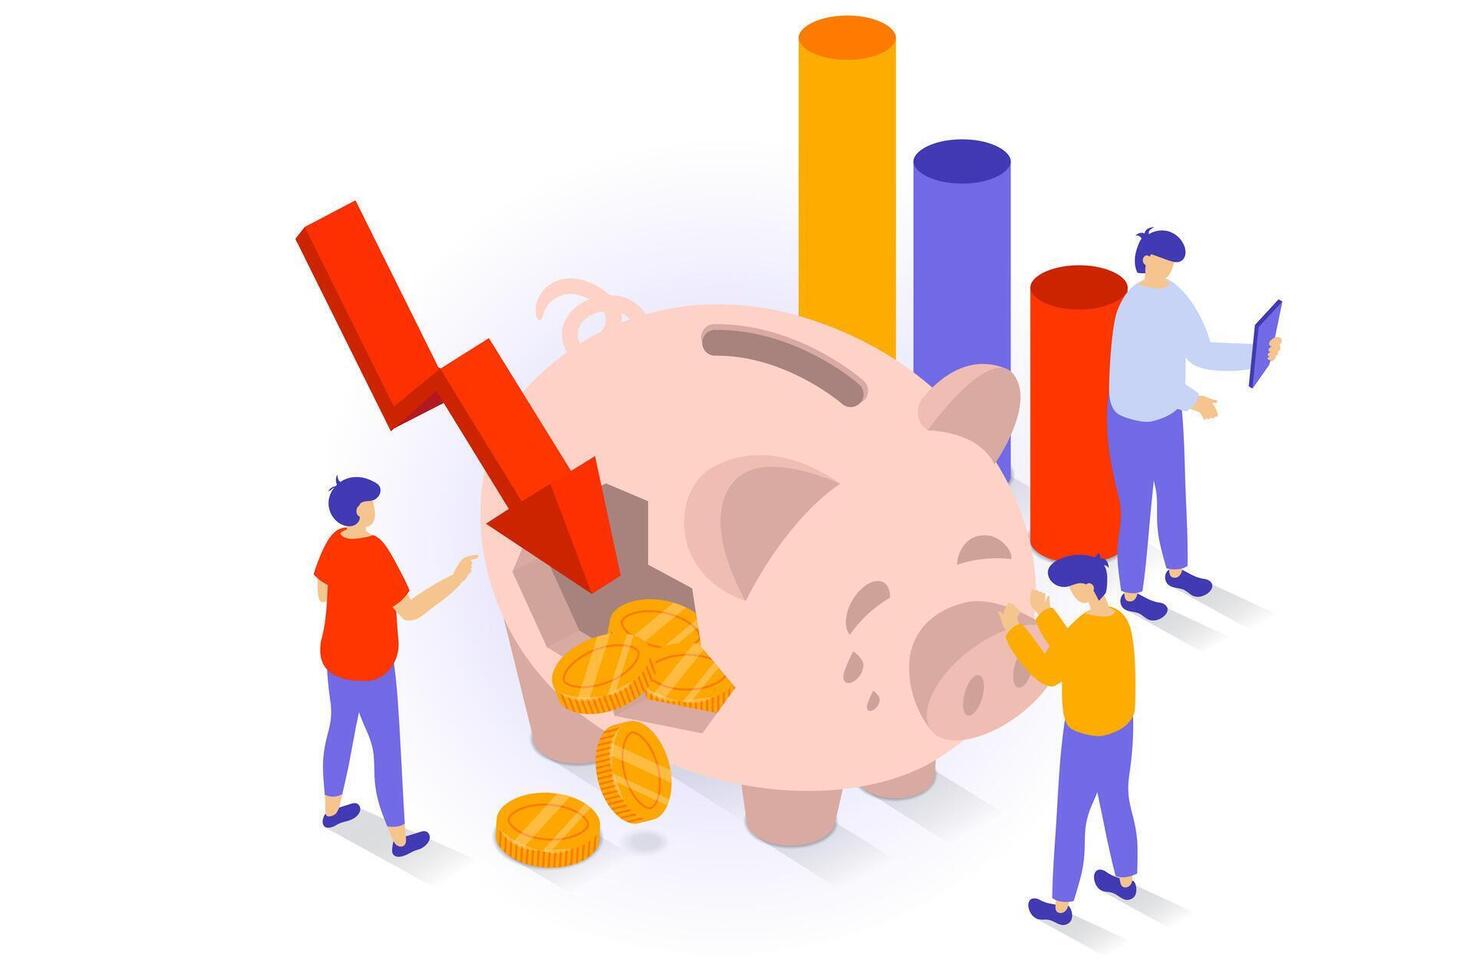 Unemployment and crisis concept in 3d isometric design. People have financial problems and money recession, break piggy bank and lose savings. Vector illustration with isometry scene for web graphic